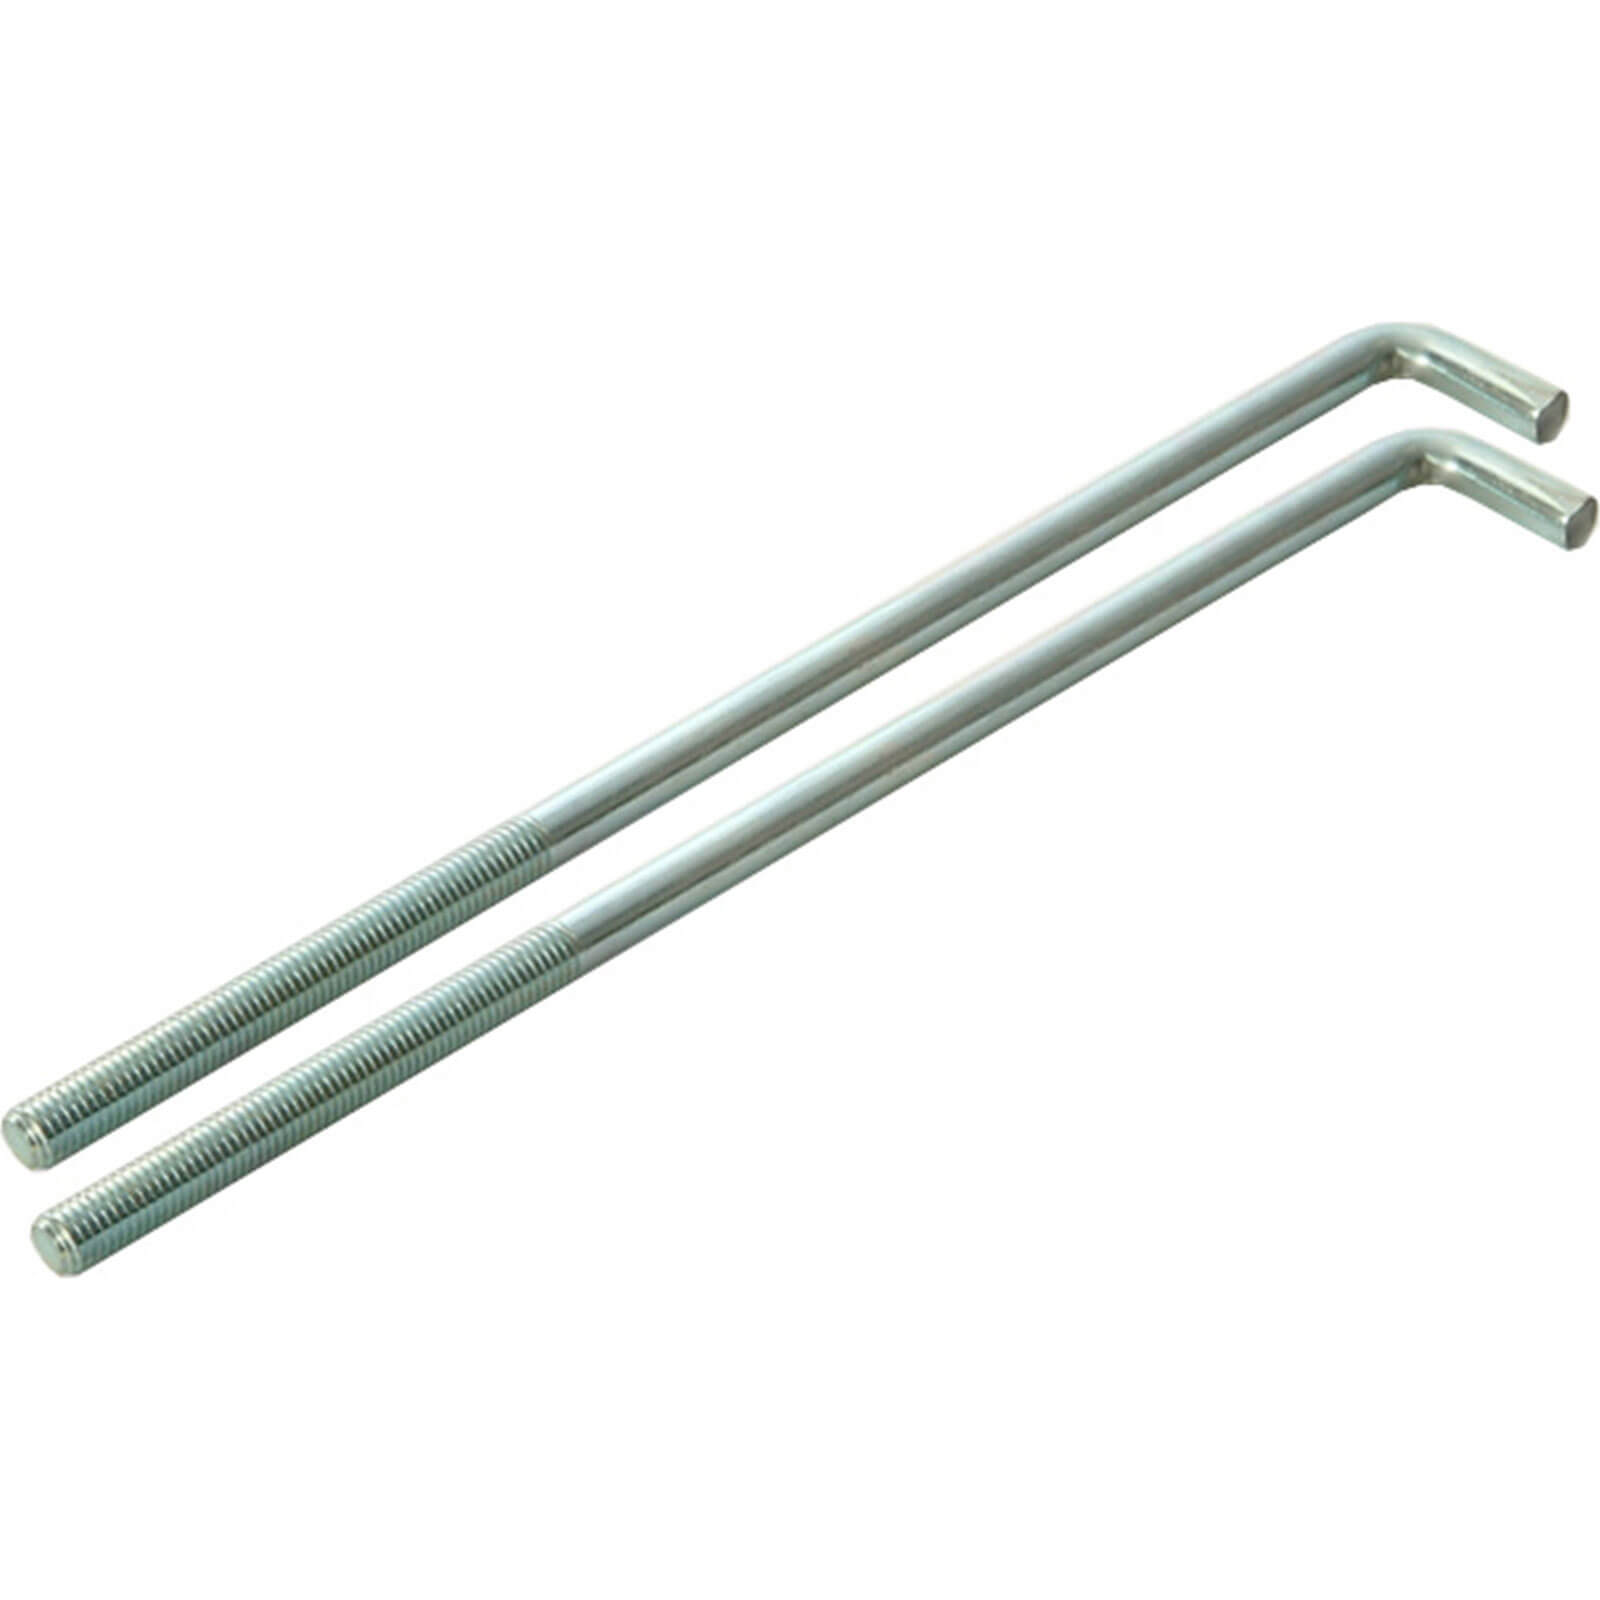 Photo of Faithfull External Building Profile Bolts 350mm Pack Of 2